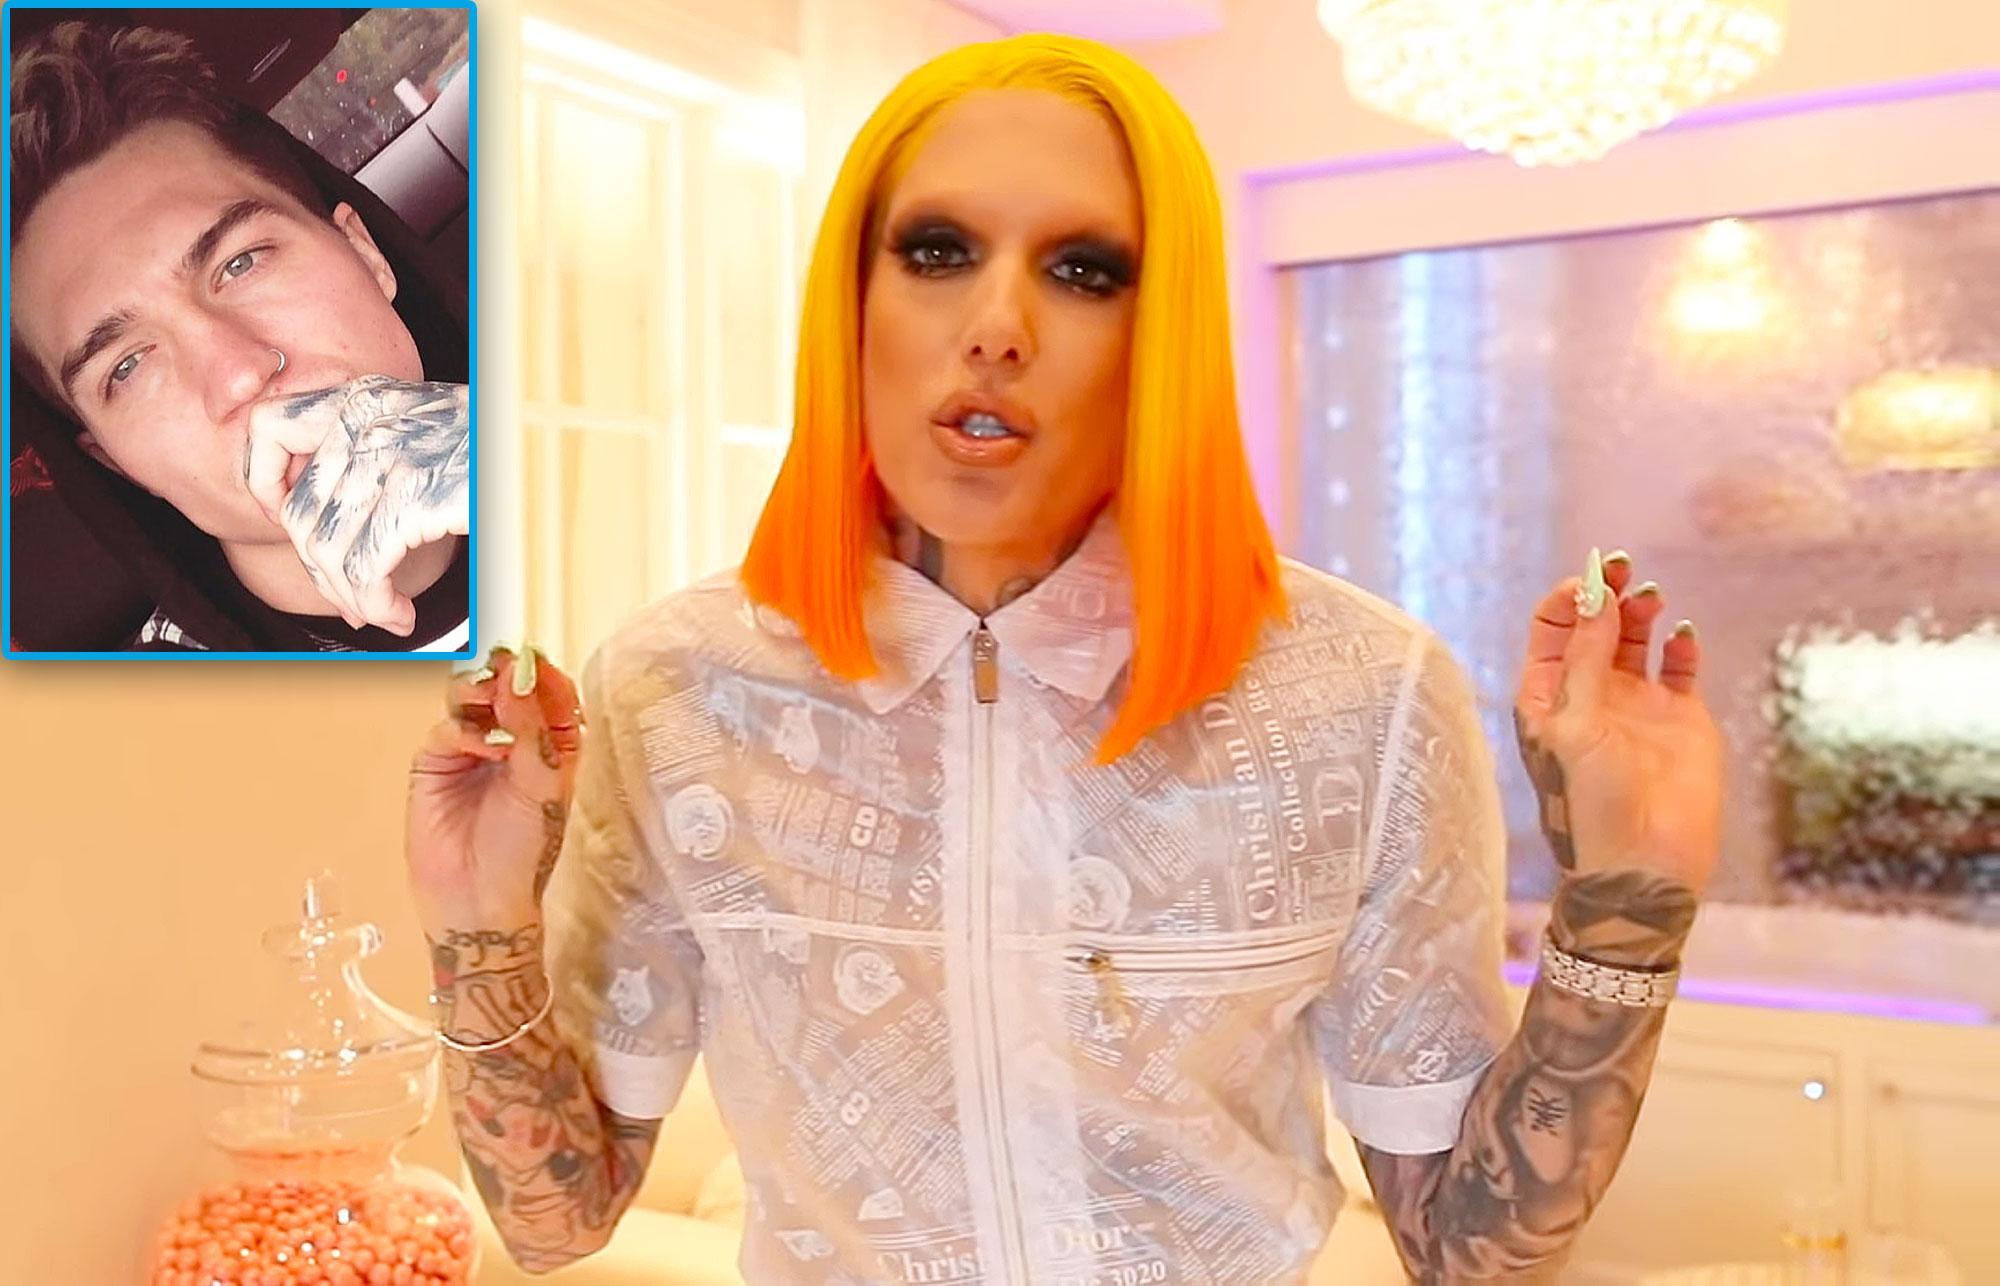 Jeffree Star responds to claims Nathan Schwandt is dating someone